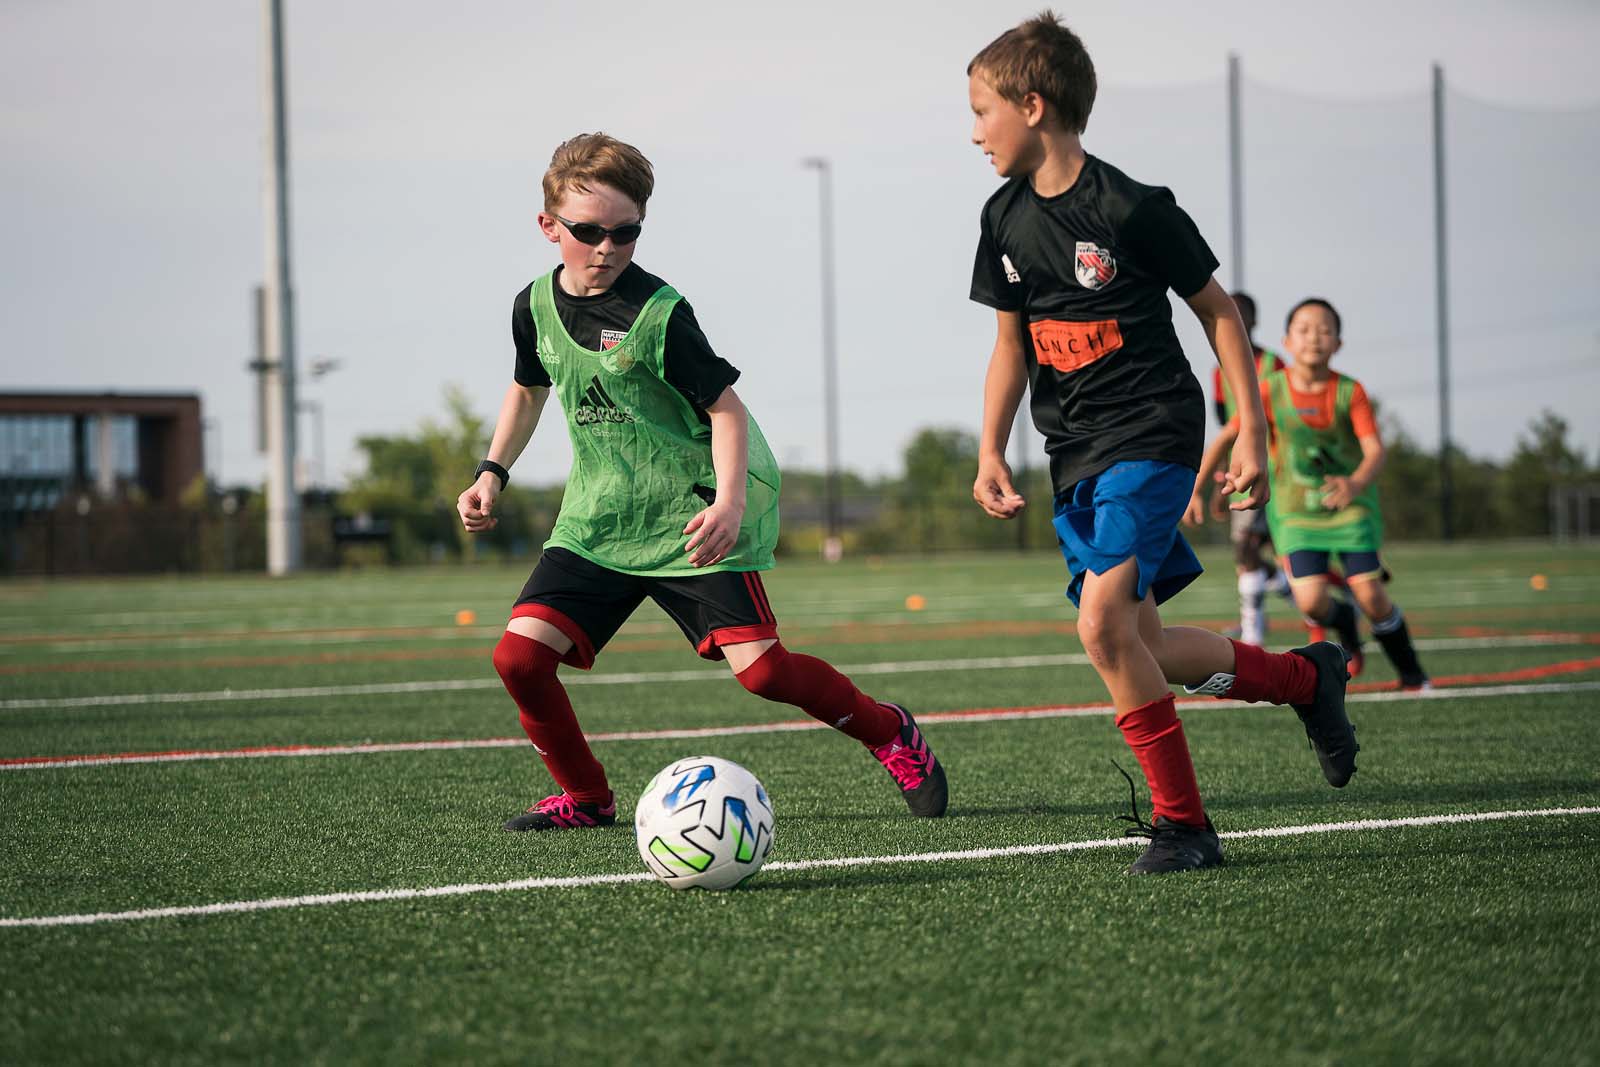 Gillette patient Toren Thiess playing soccer